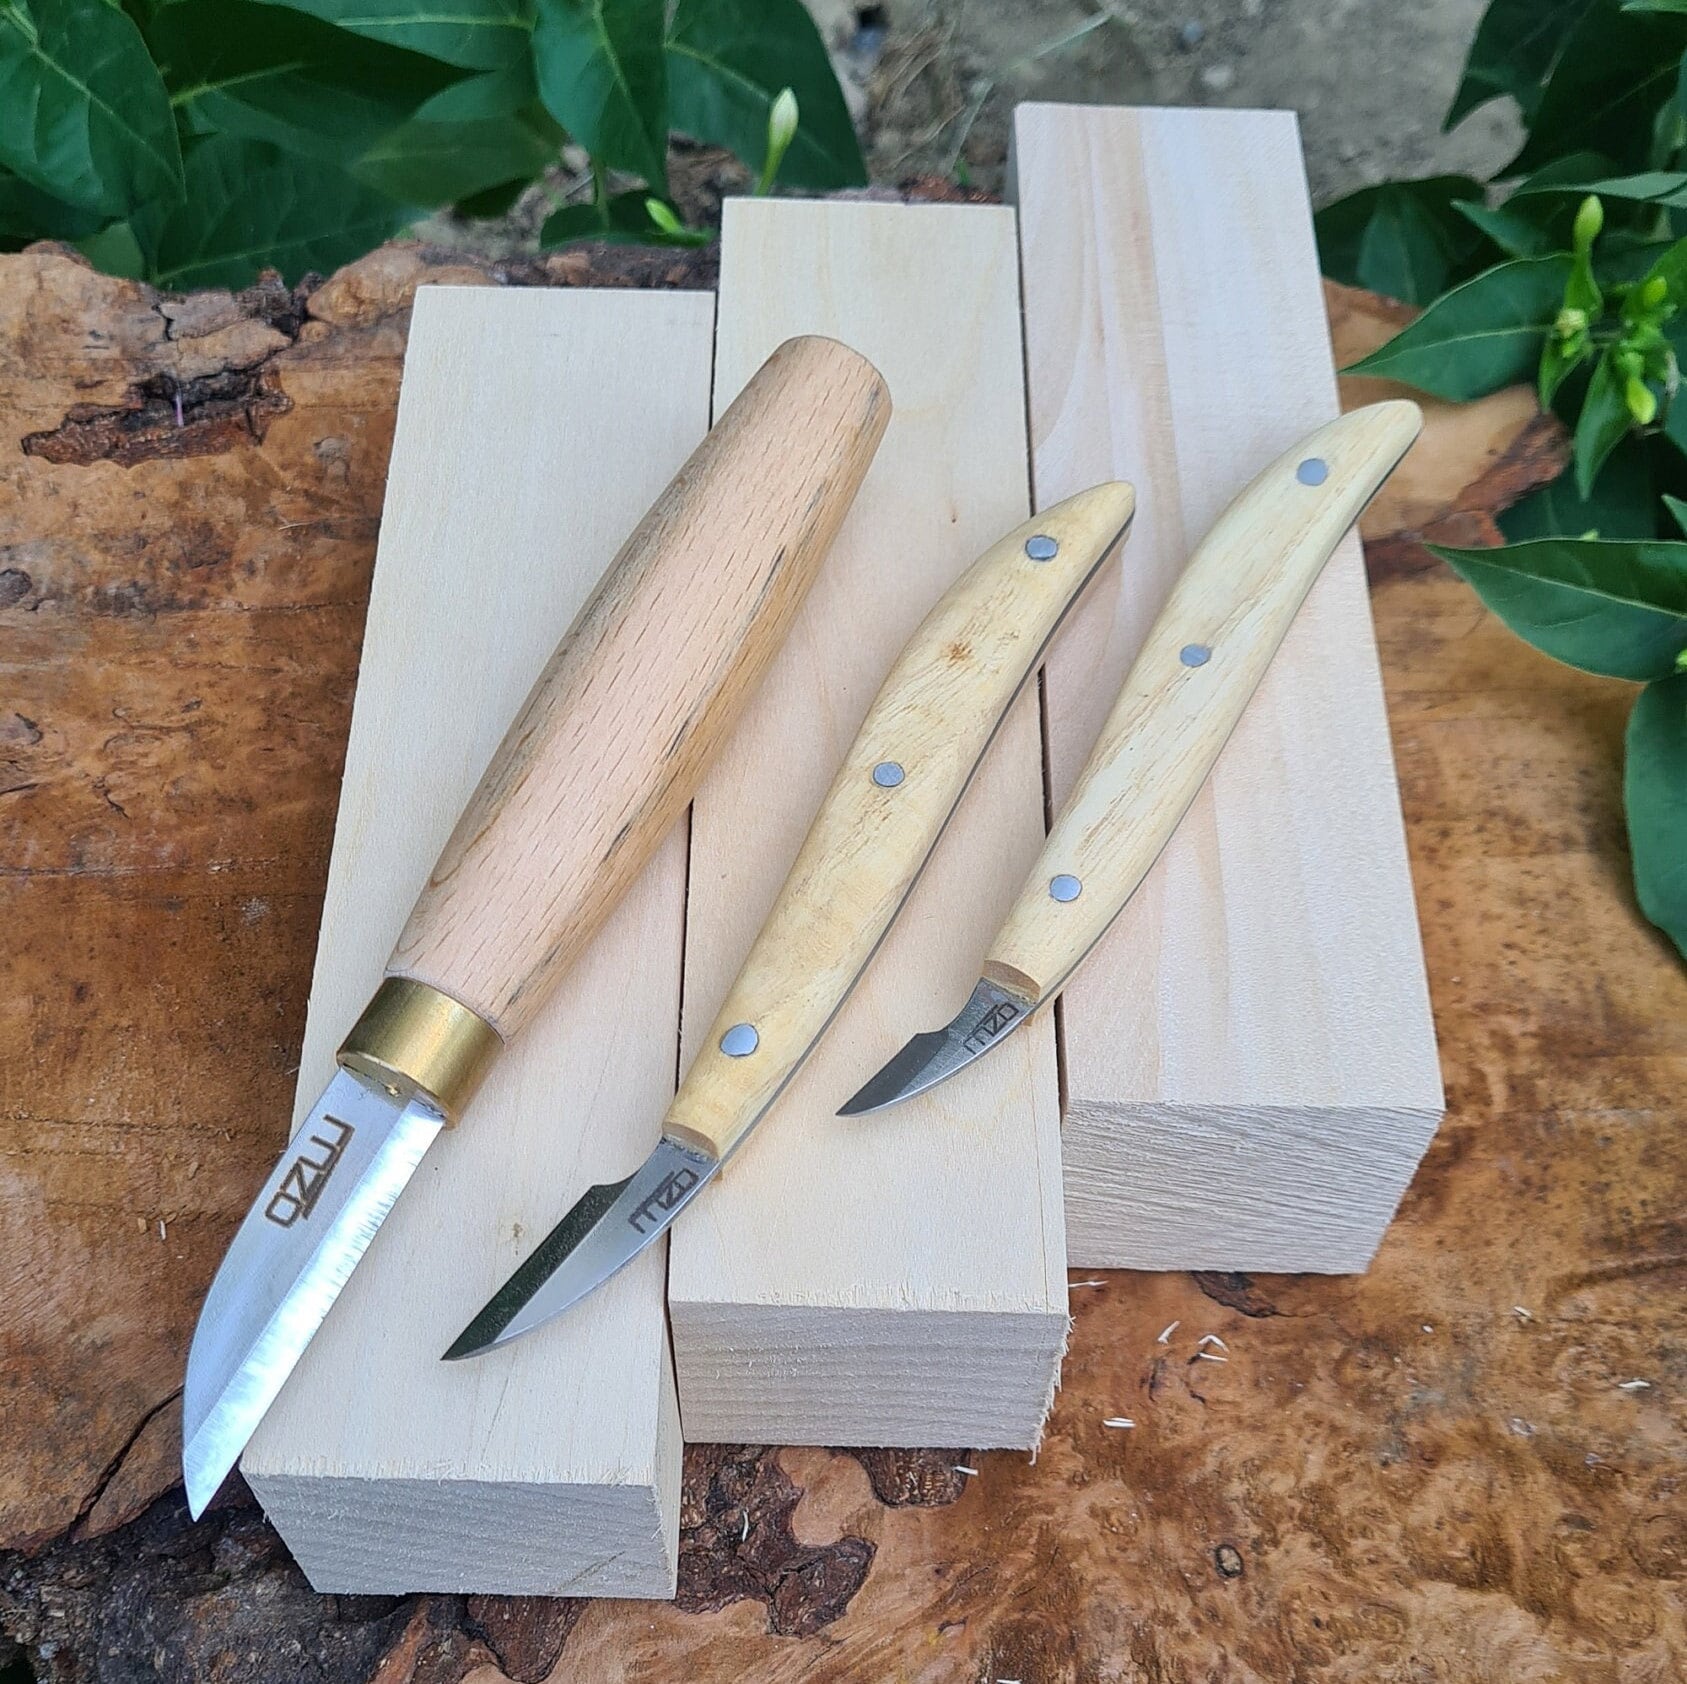 5 PC Chip Set - Wood Carving Knives and 5 Pocket Leather Tool Roll - Woodcarving, Whittling, Decoy, DIY Crafts